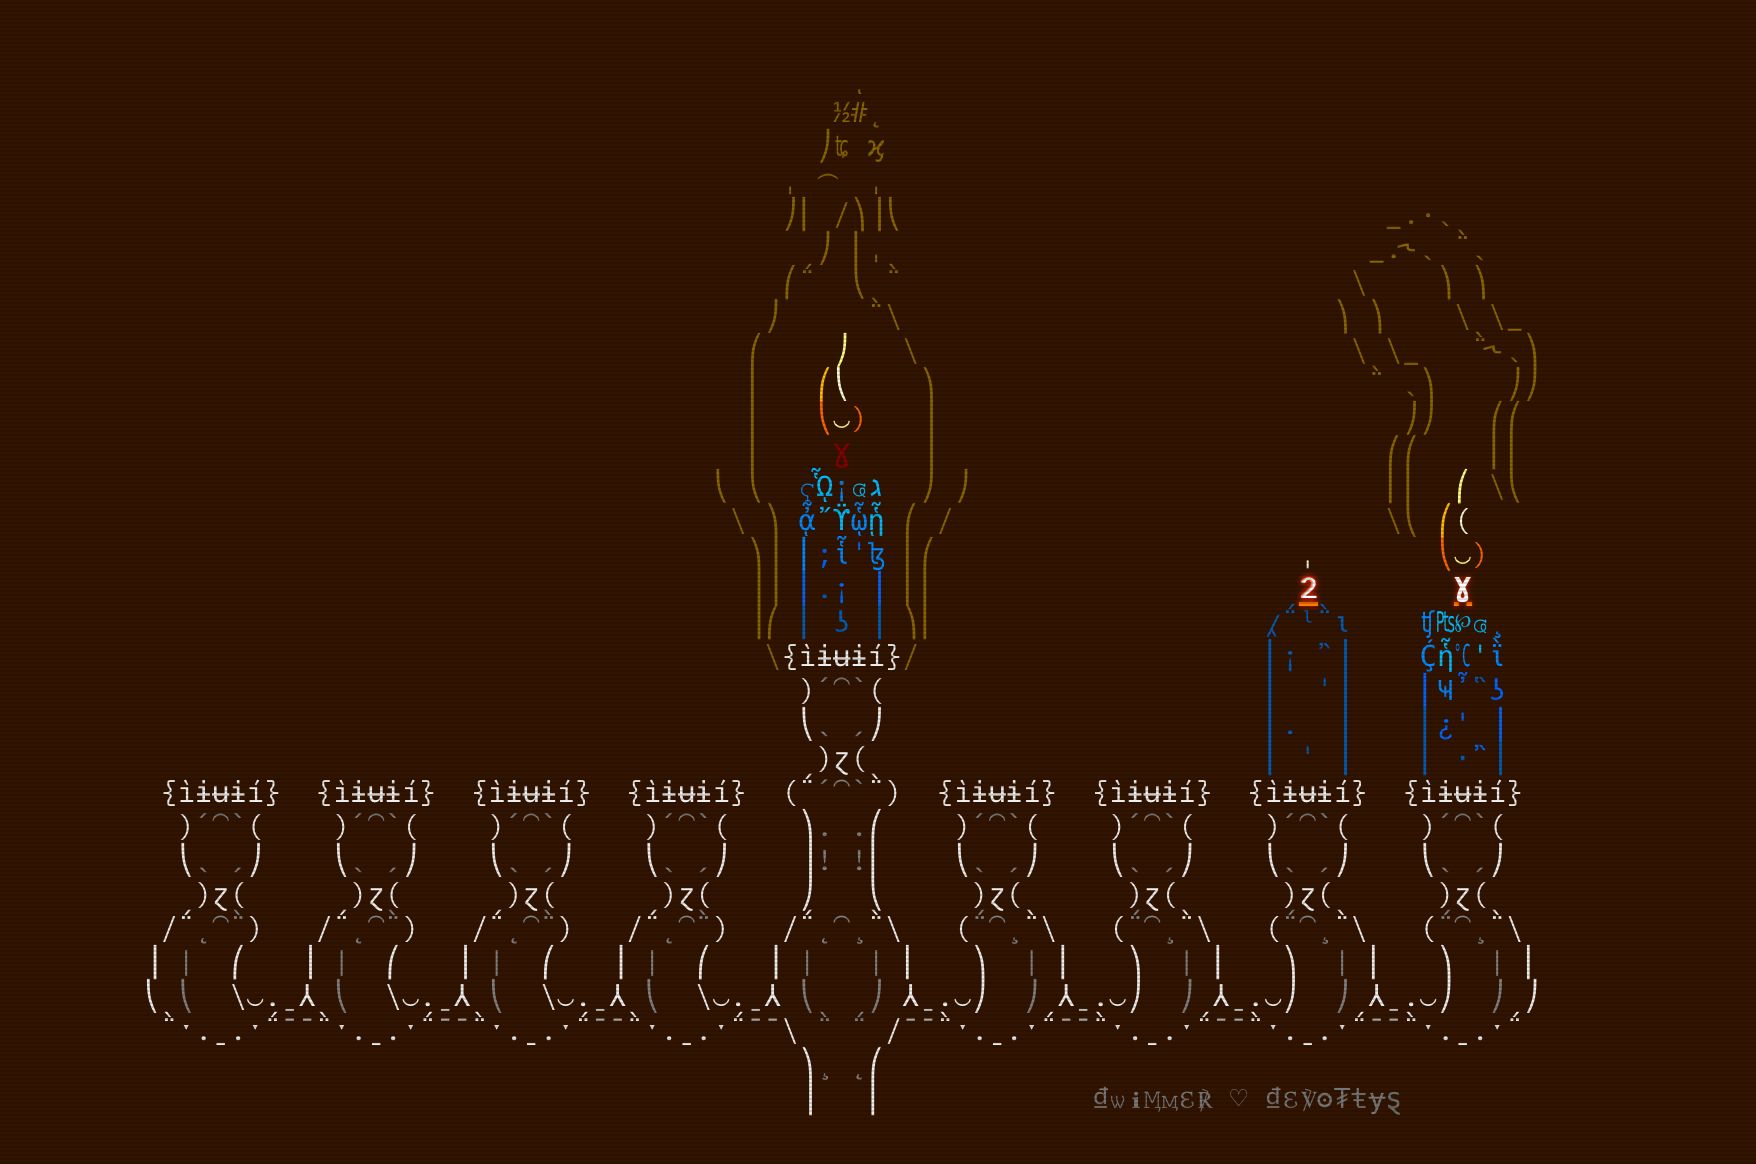 An ASCII art image of a menorah. The shamash and first candle are lit. There&#039;s an unlit candle for the second night. The remaining candle holders are empty.
